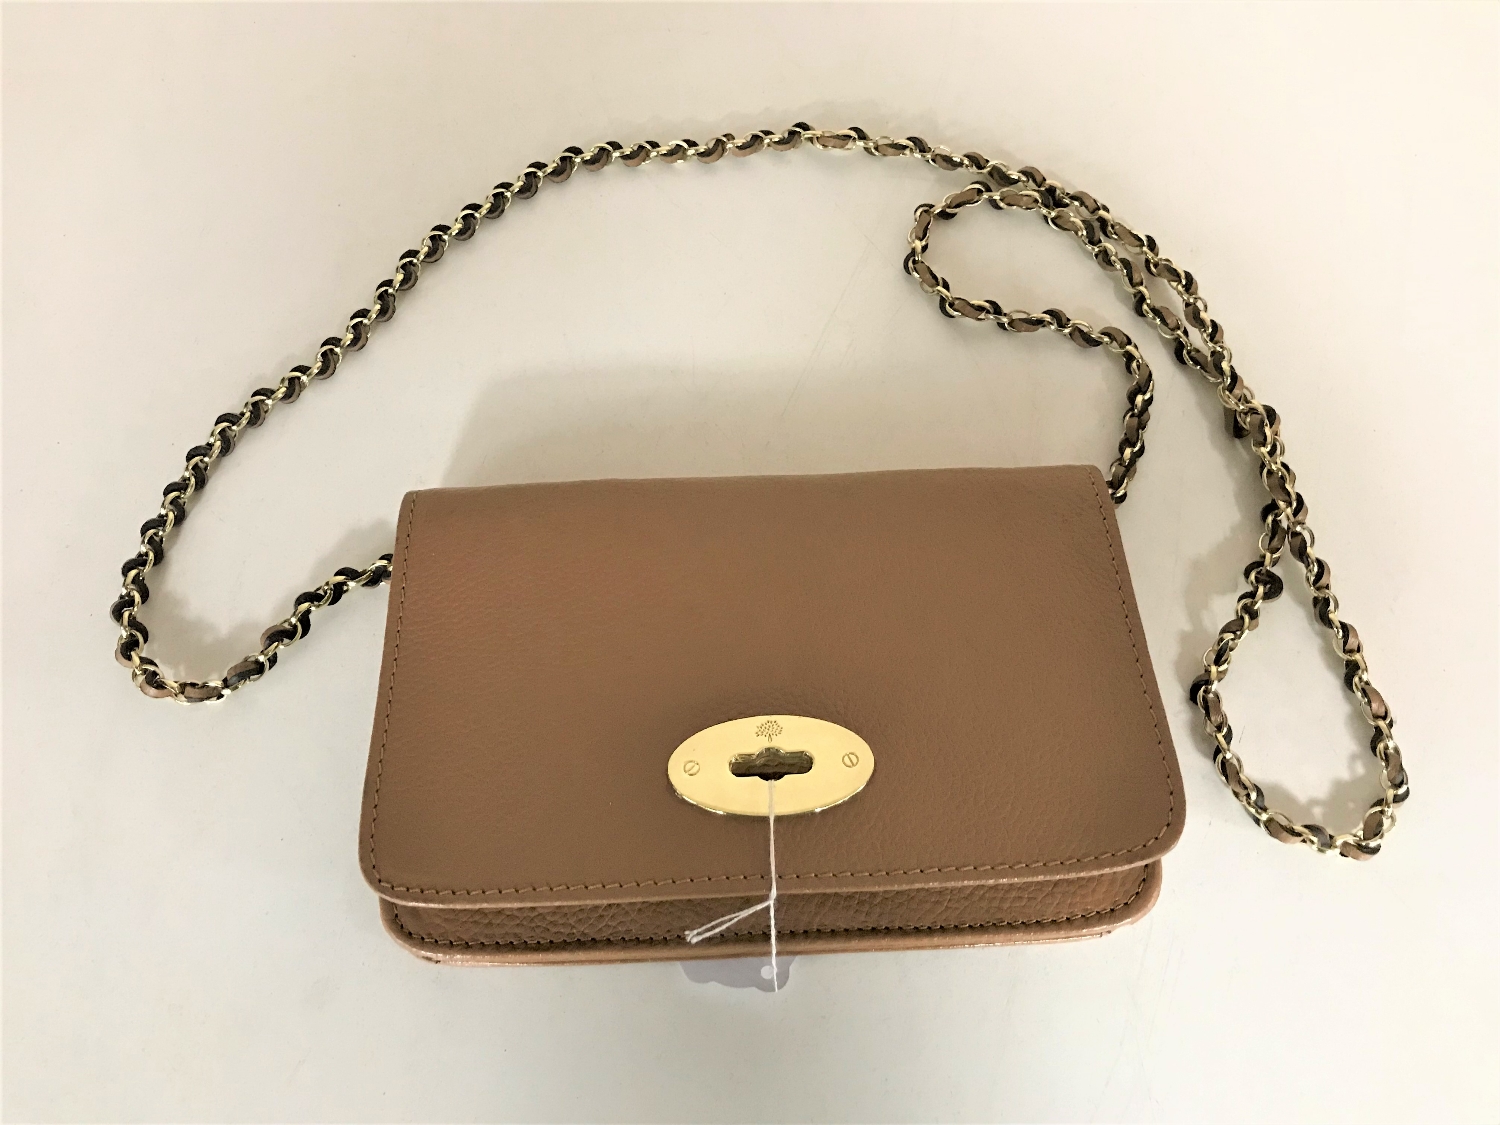 A brown leather Mulberry Darwin clutch bag with shoulder strap CONDITION REPORT: